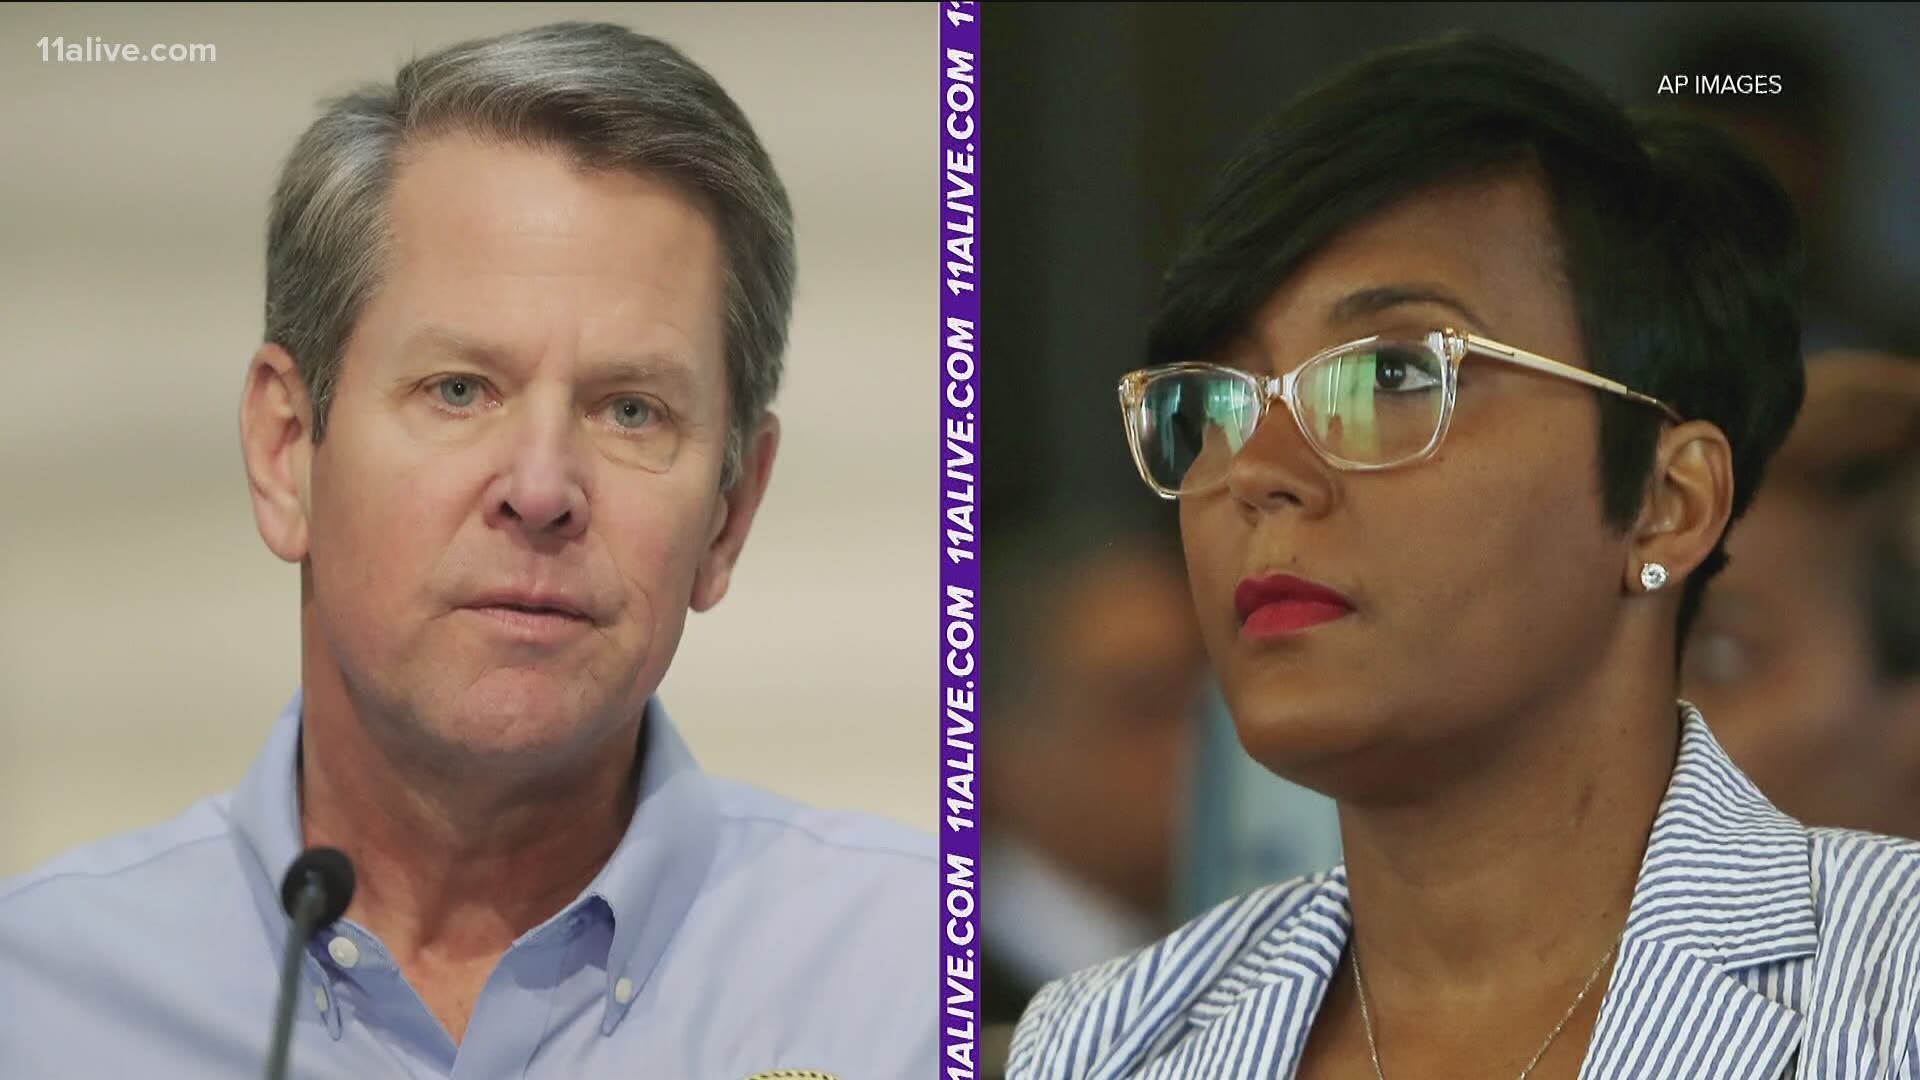 Bottoms responds, saying it is unfortunate that Kemp "seeks to intentionally mislead the people" of Georgia with an inaccurate statement.